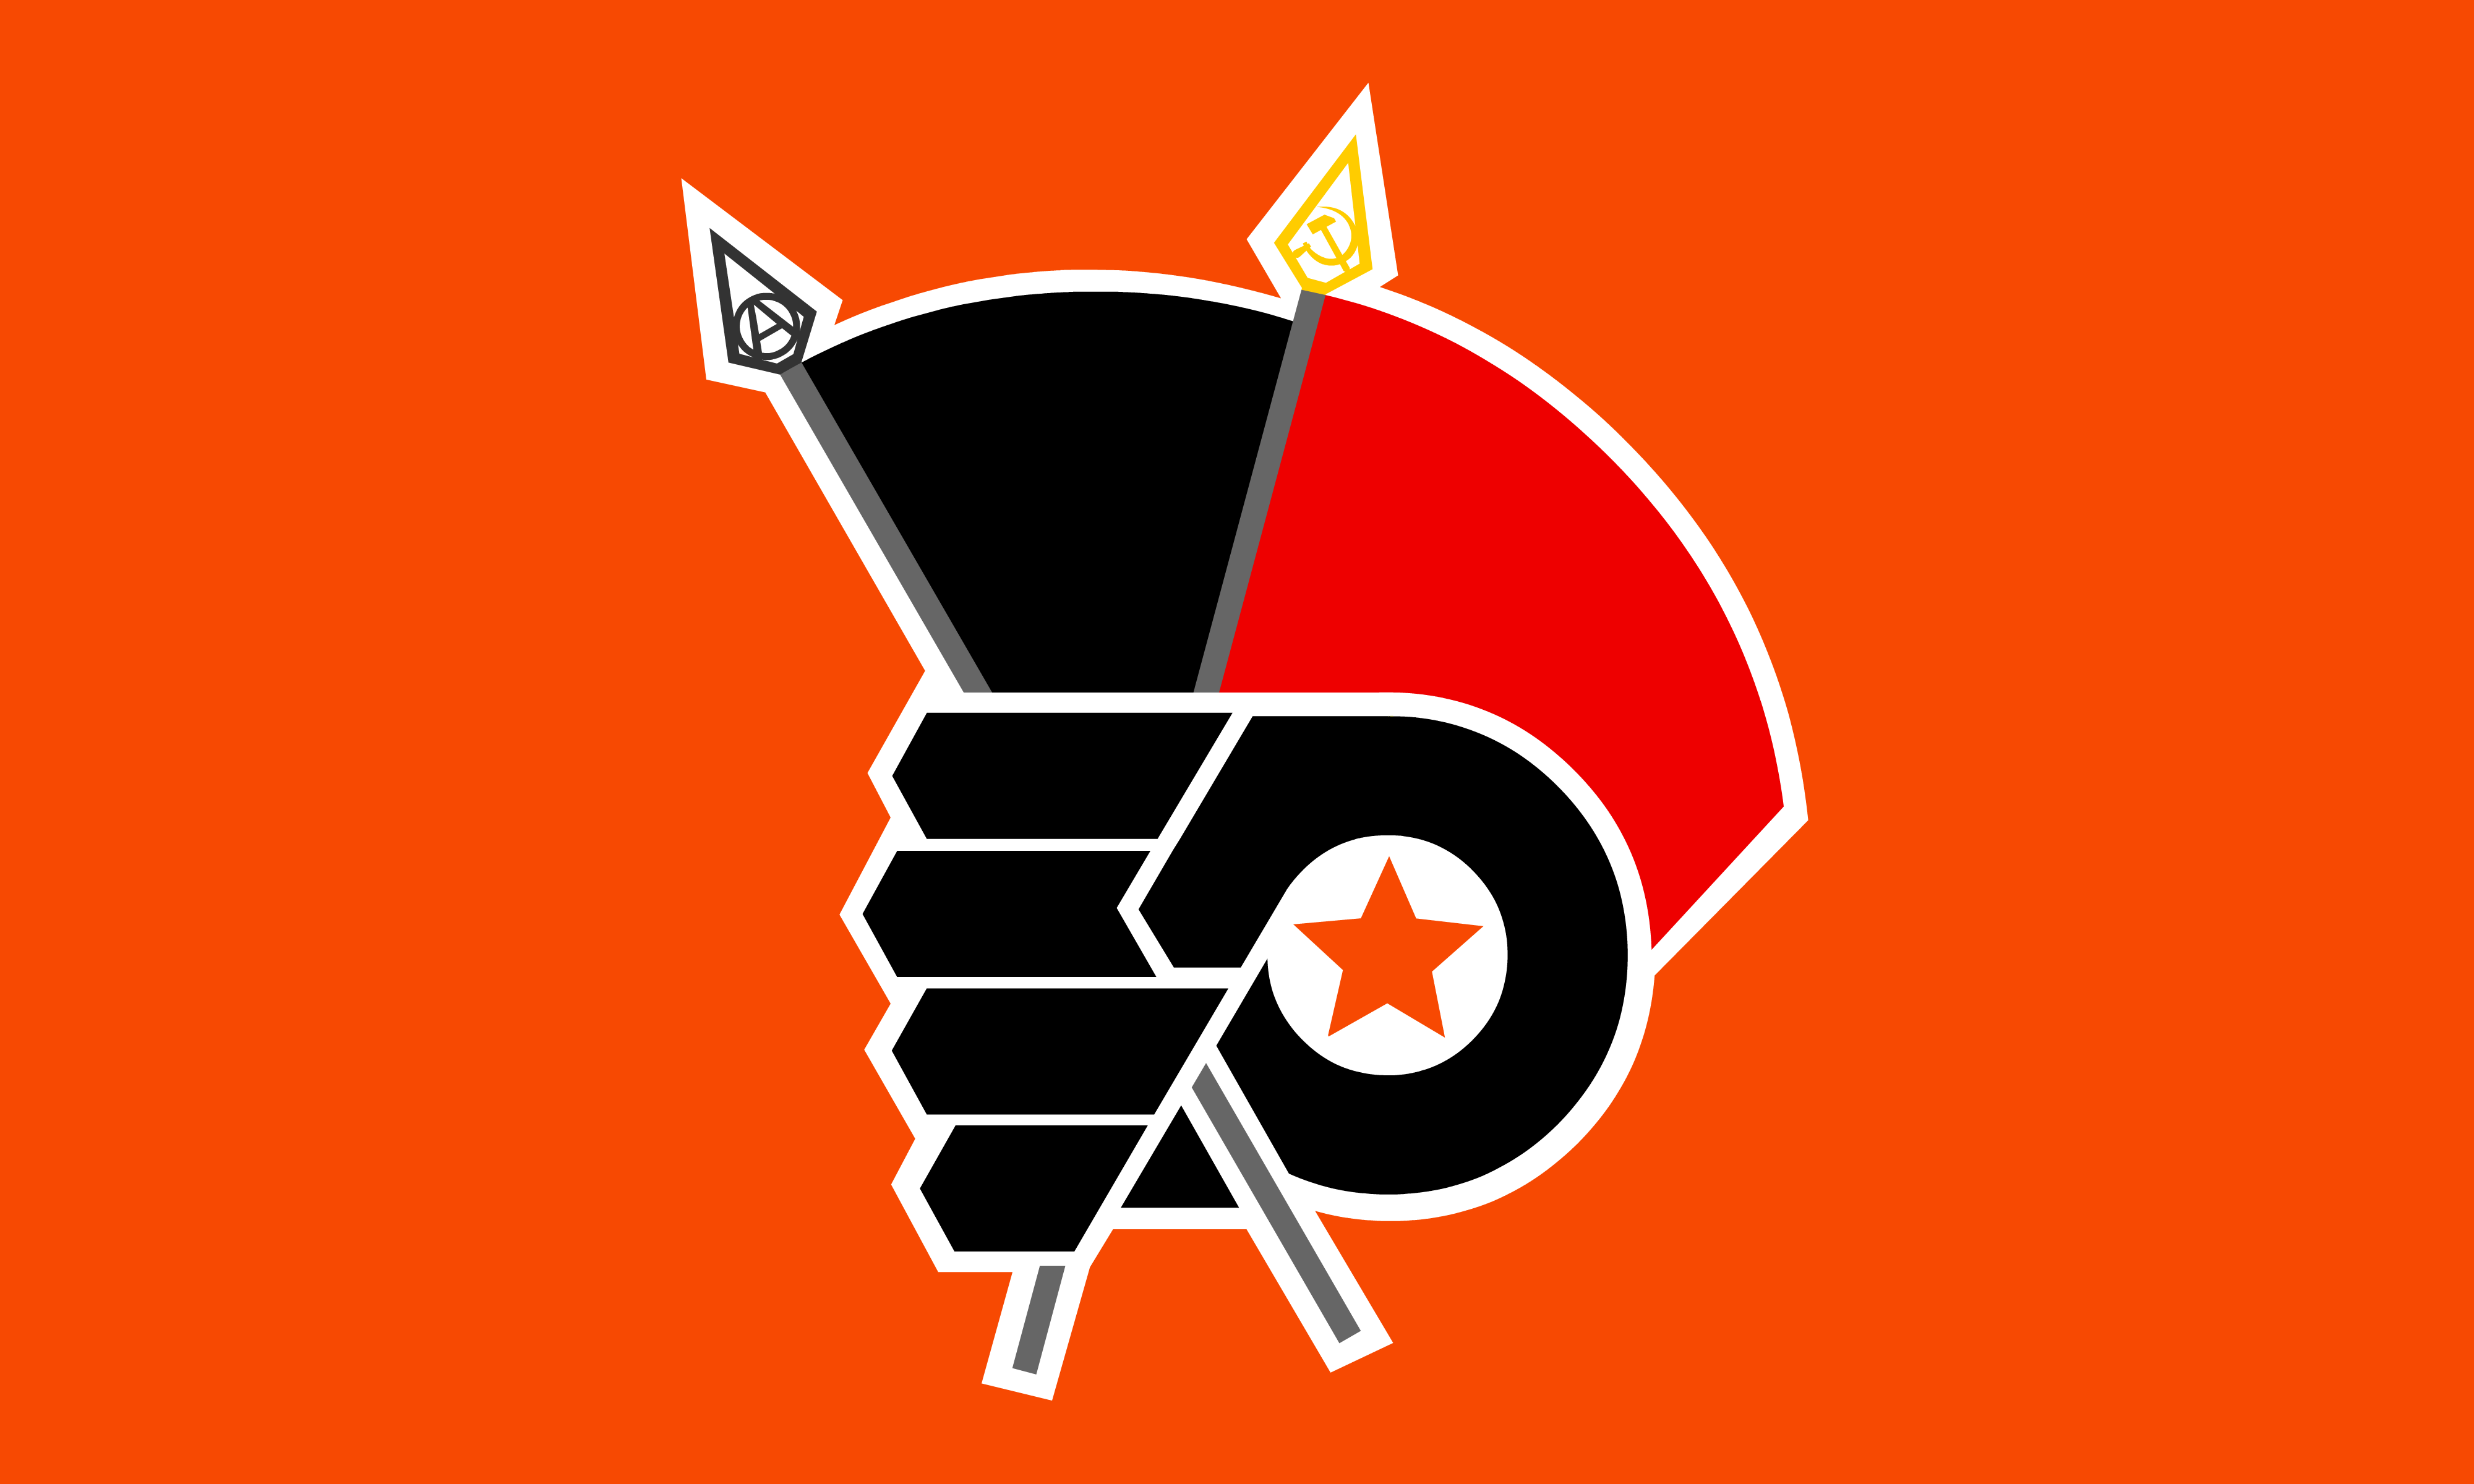 Gritty's Logo - Flag for Comrade Gritty, a fellow worker and Antifa Supersoldier